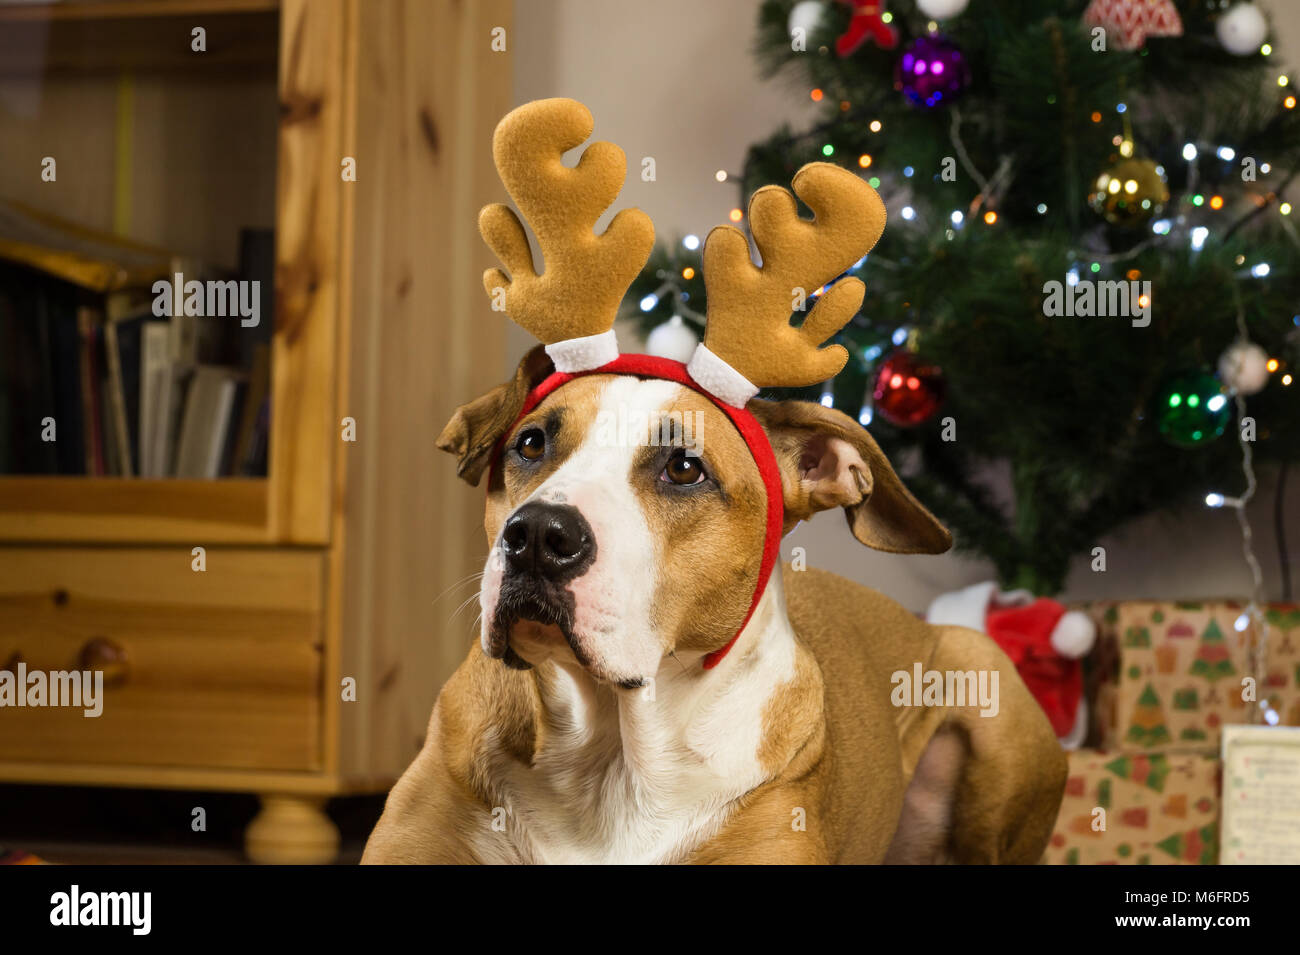 Staffordshire terrier dog dressed up for winter holidays in living room next to christmas tree and gifts wrapped in packpaper Stock Photo